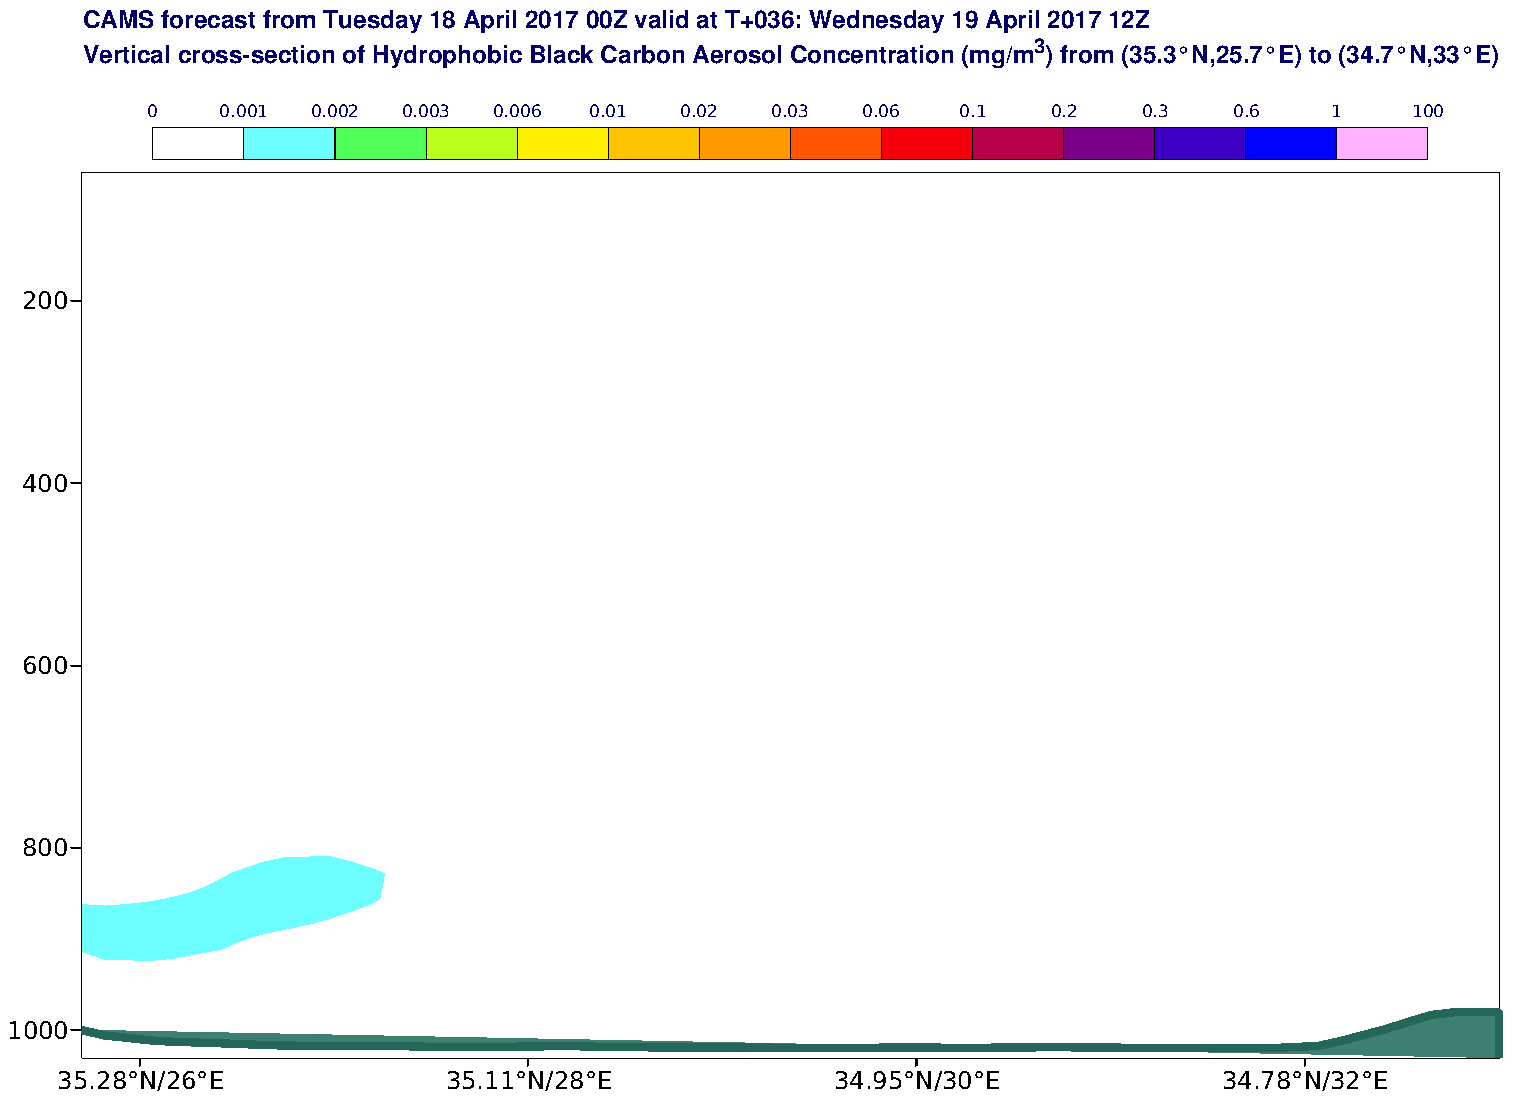 Vertical cross-section of Hydrophobic Black Carbon Aerosol Concentration (mg/m3) valid at T36 - 2017-04-19 12:00